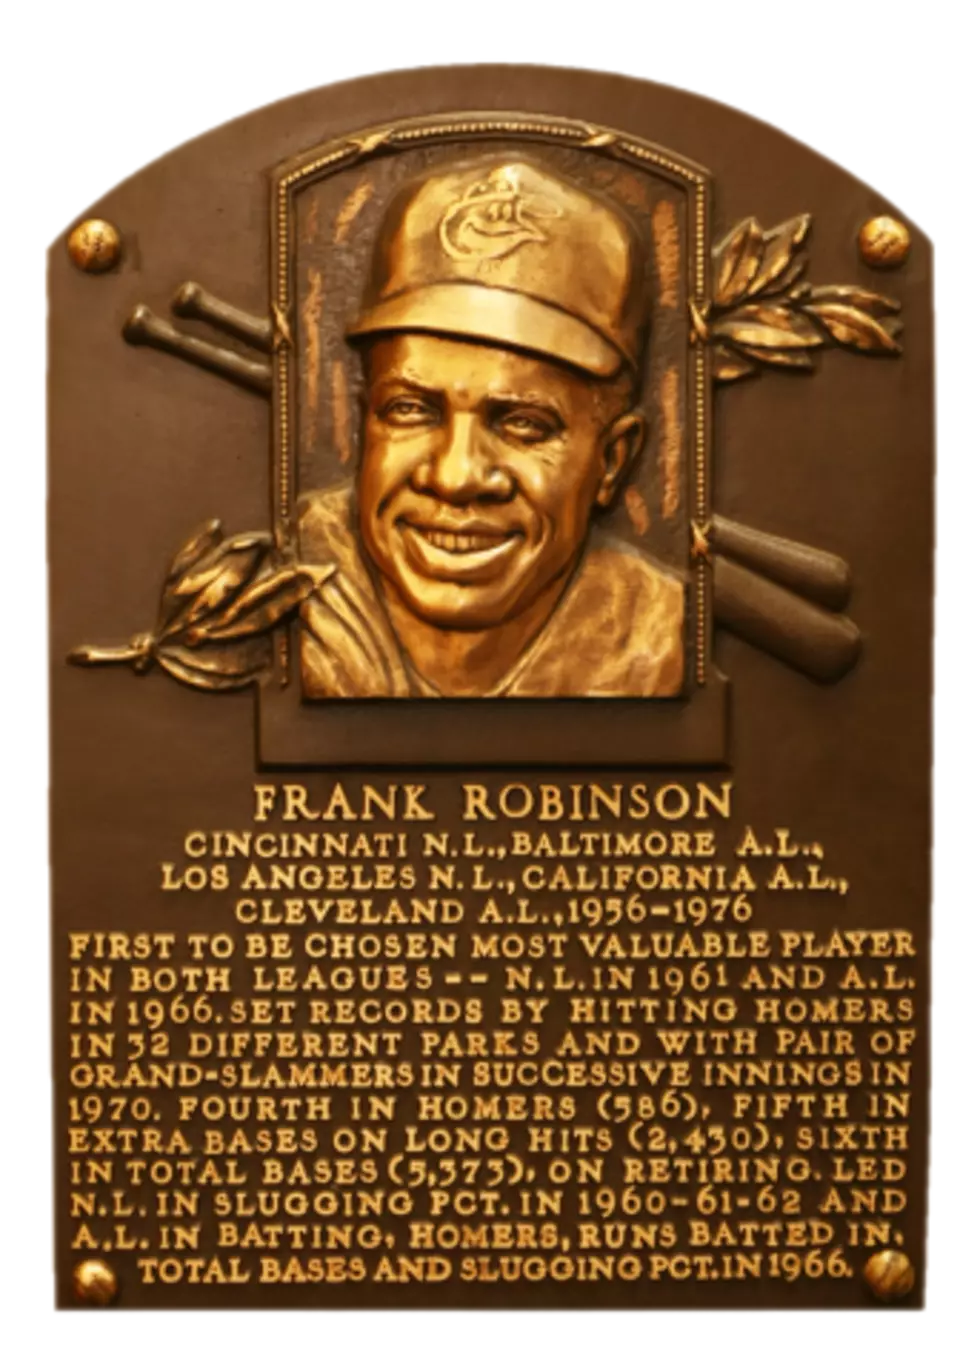 Baseball Hall of Fame Remembers One of the Greats: Frank Robinson